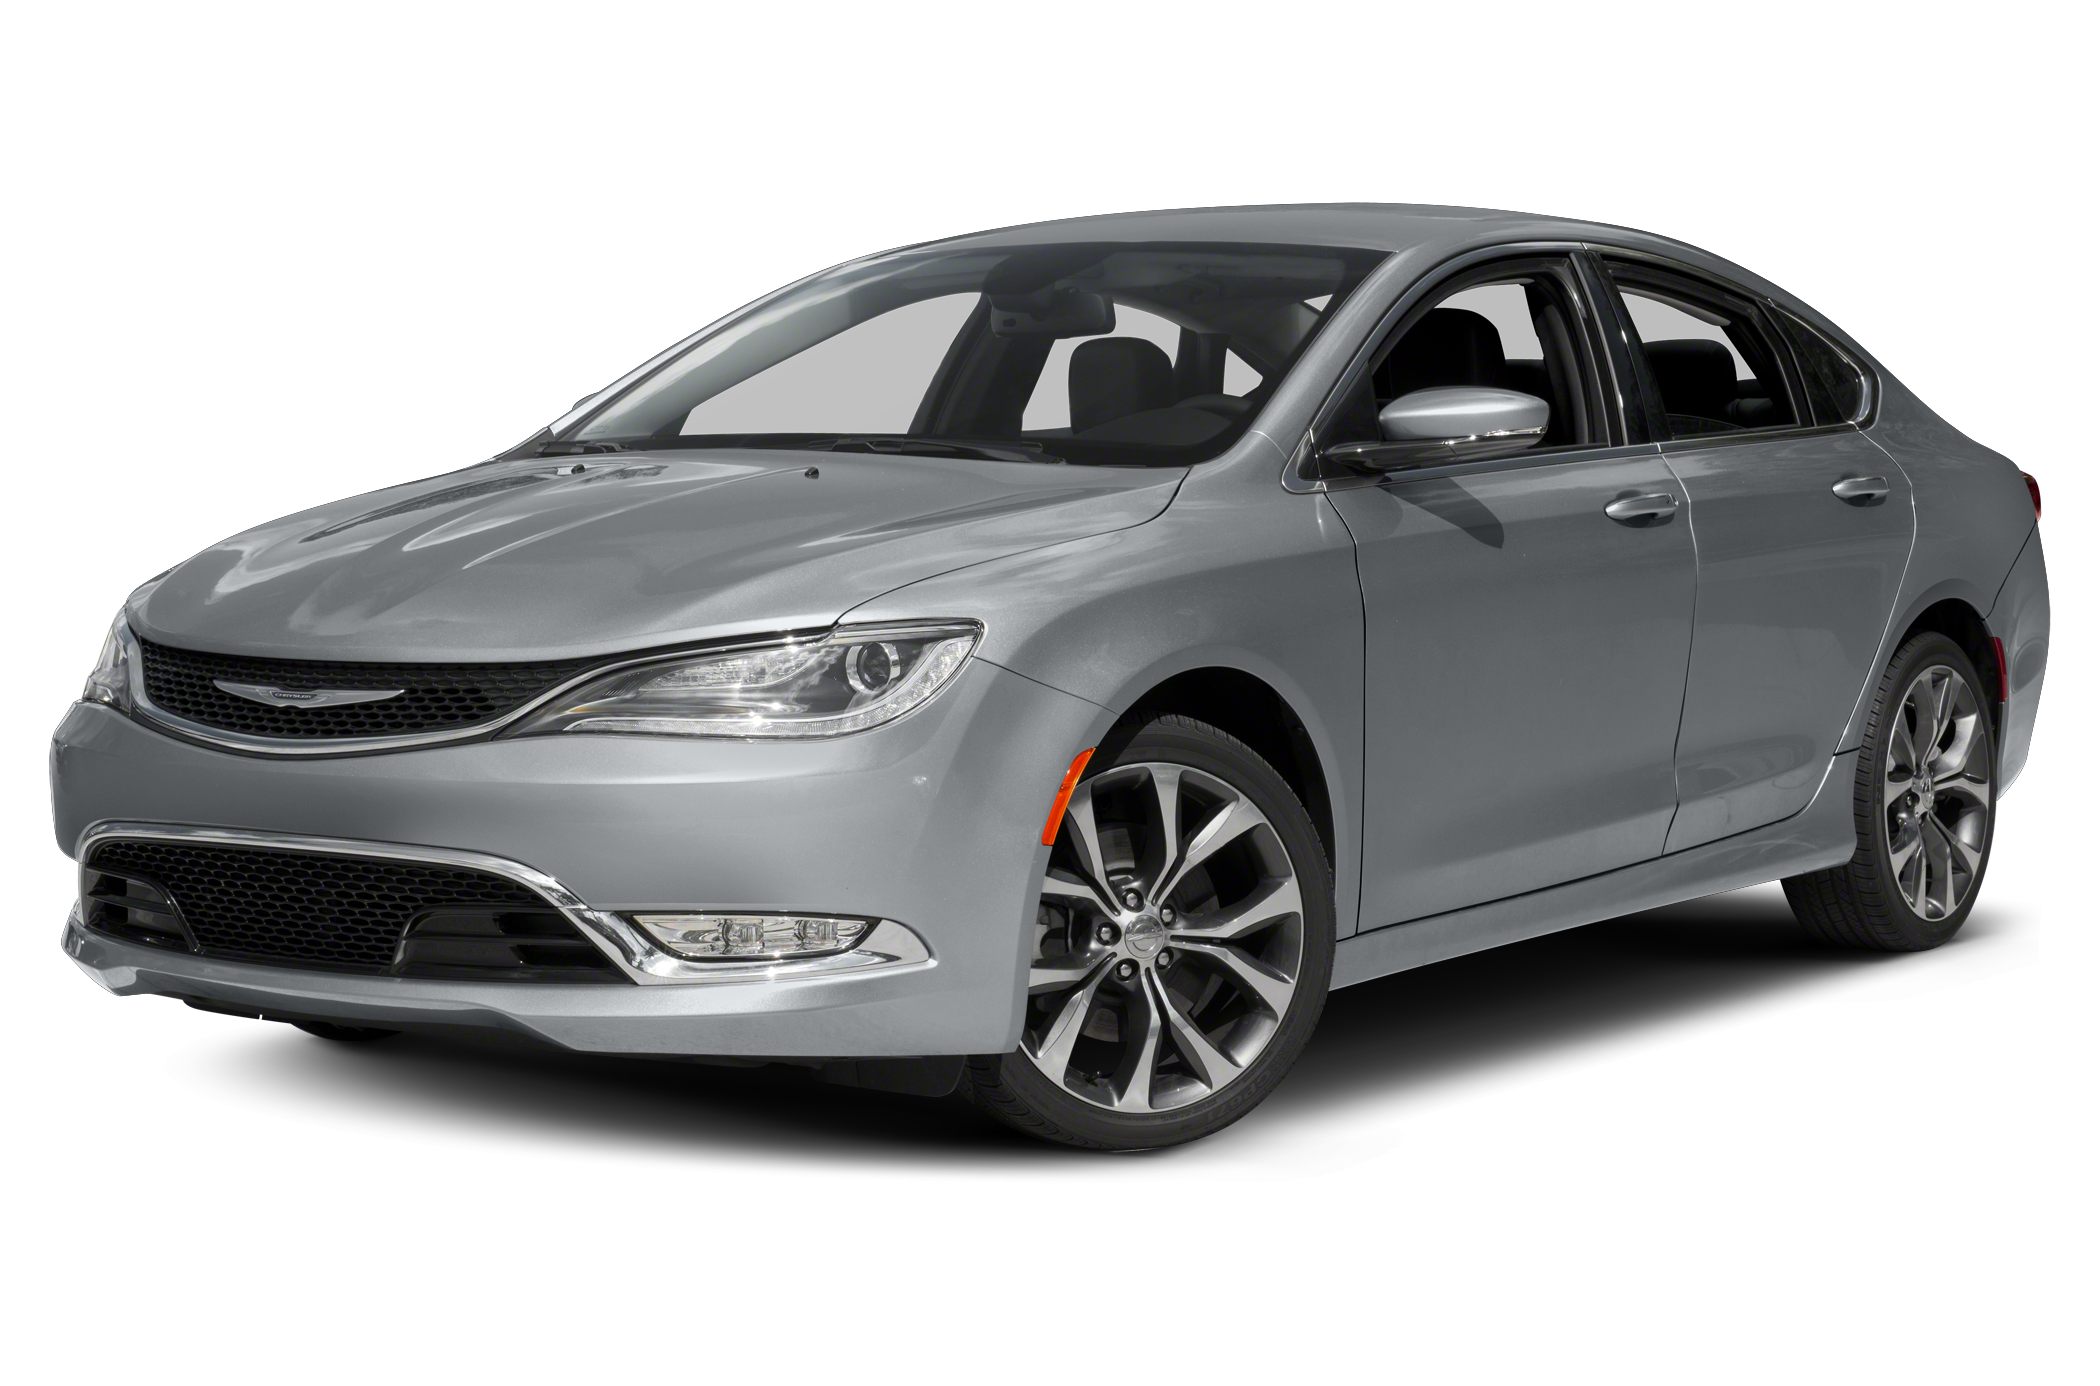 2015 Chrysler 200 Safety Features